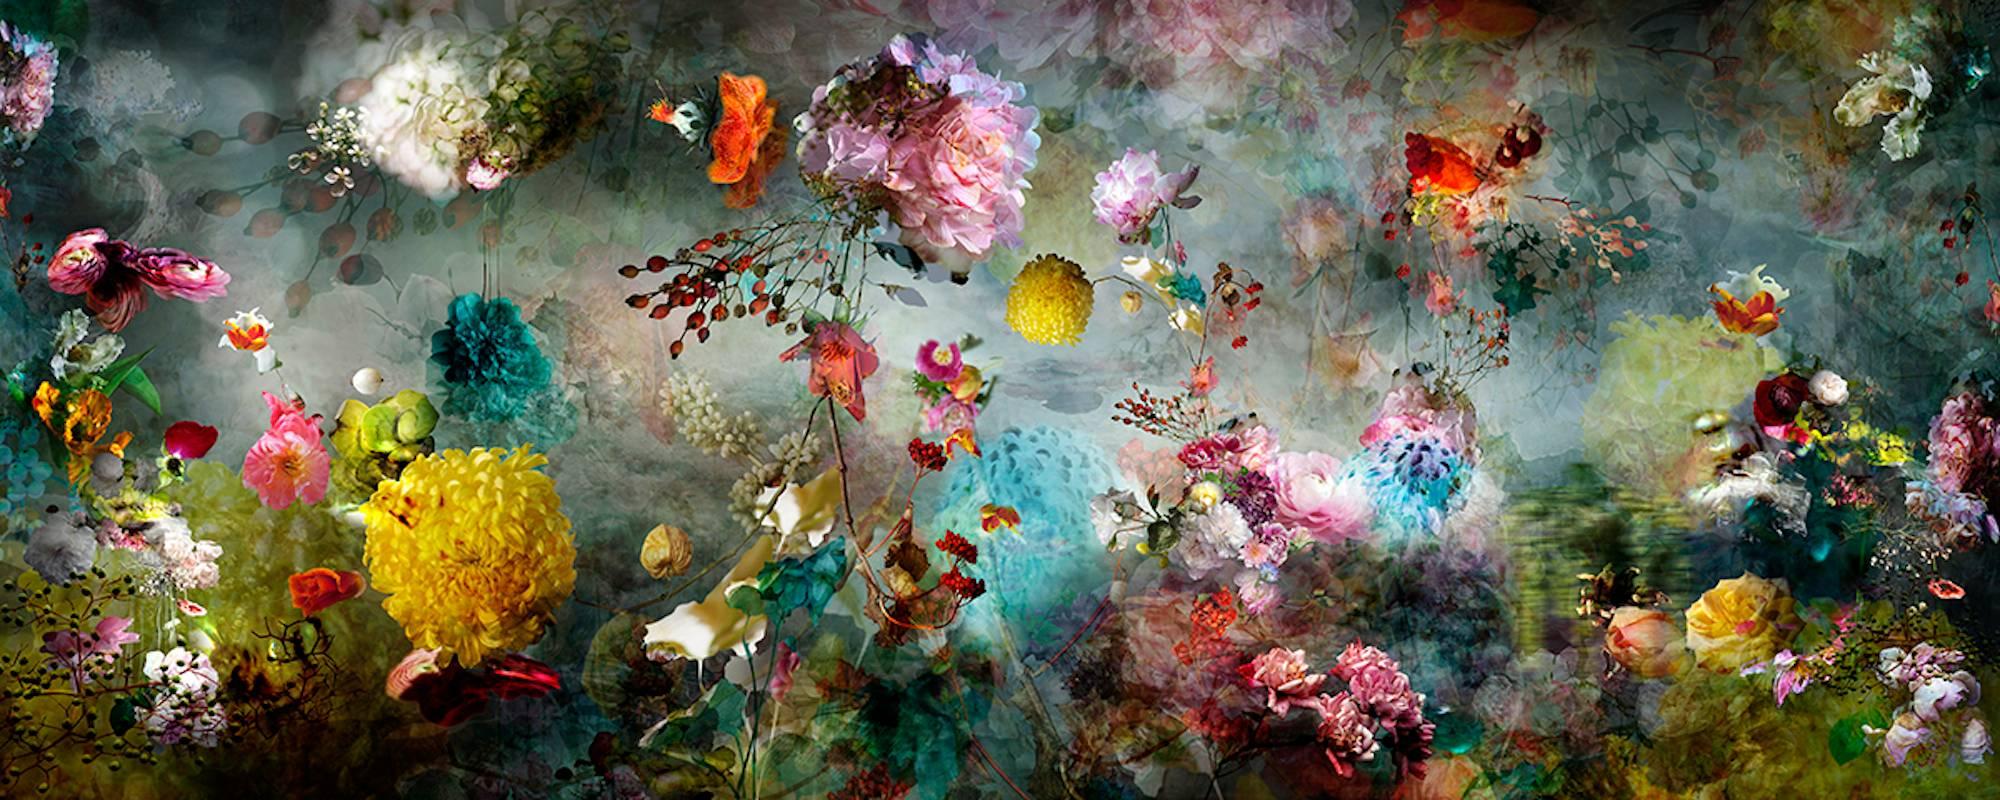 Isabelle Menin Color Photograph - Song for Dead Heroes #12 pastel color abstract floral still life photo